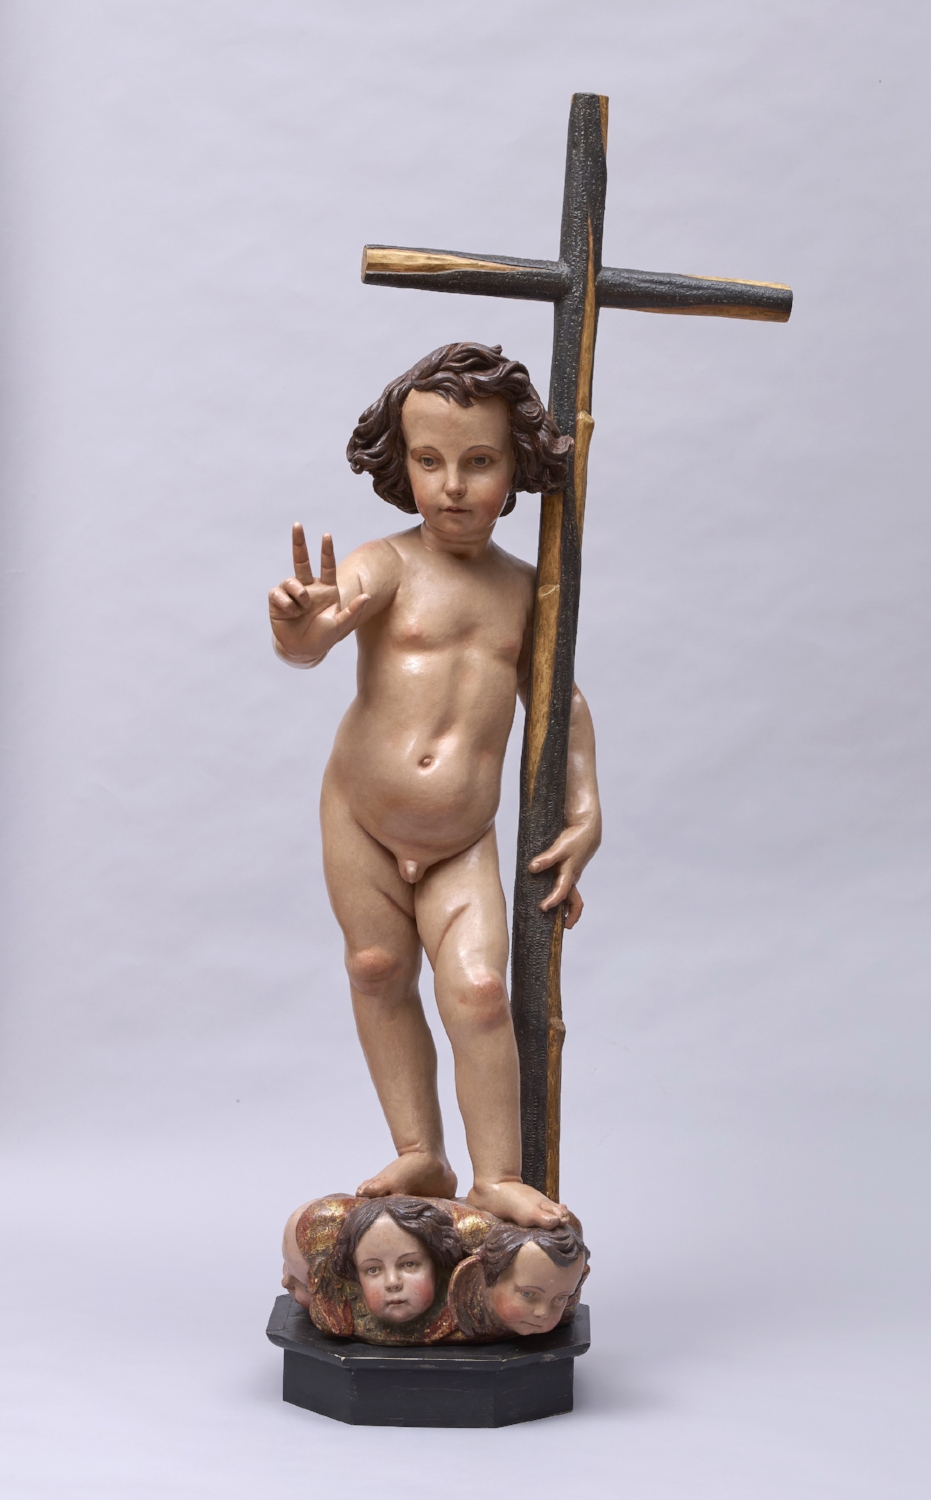 Francisco Dionisio de Ribas, Infant Jesus in triumph - View from the Front